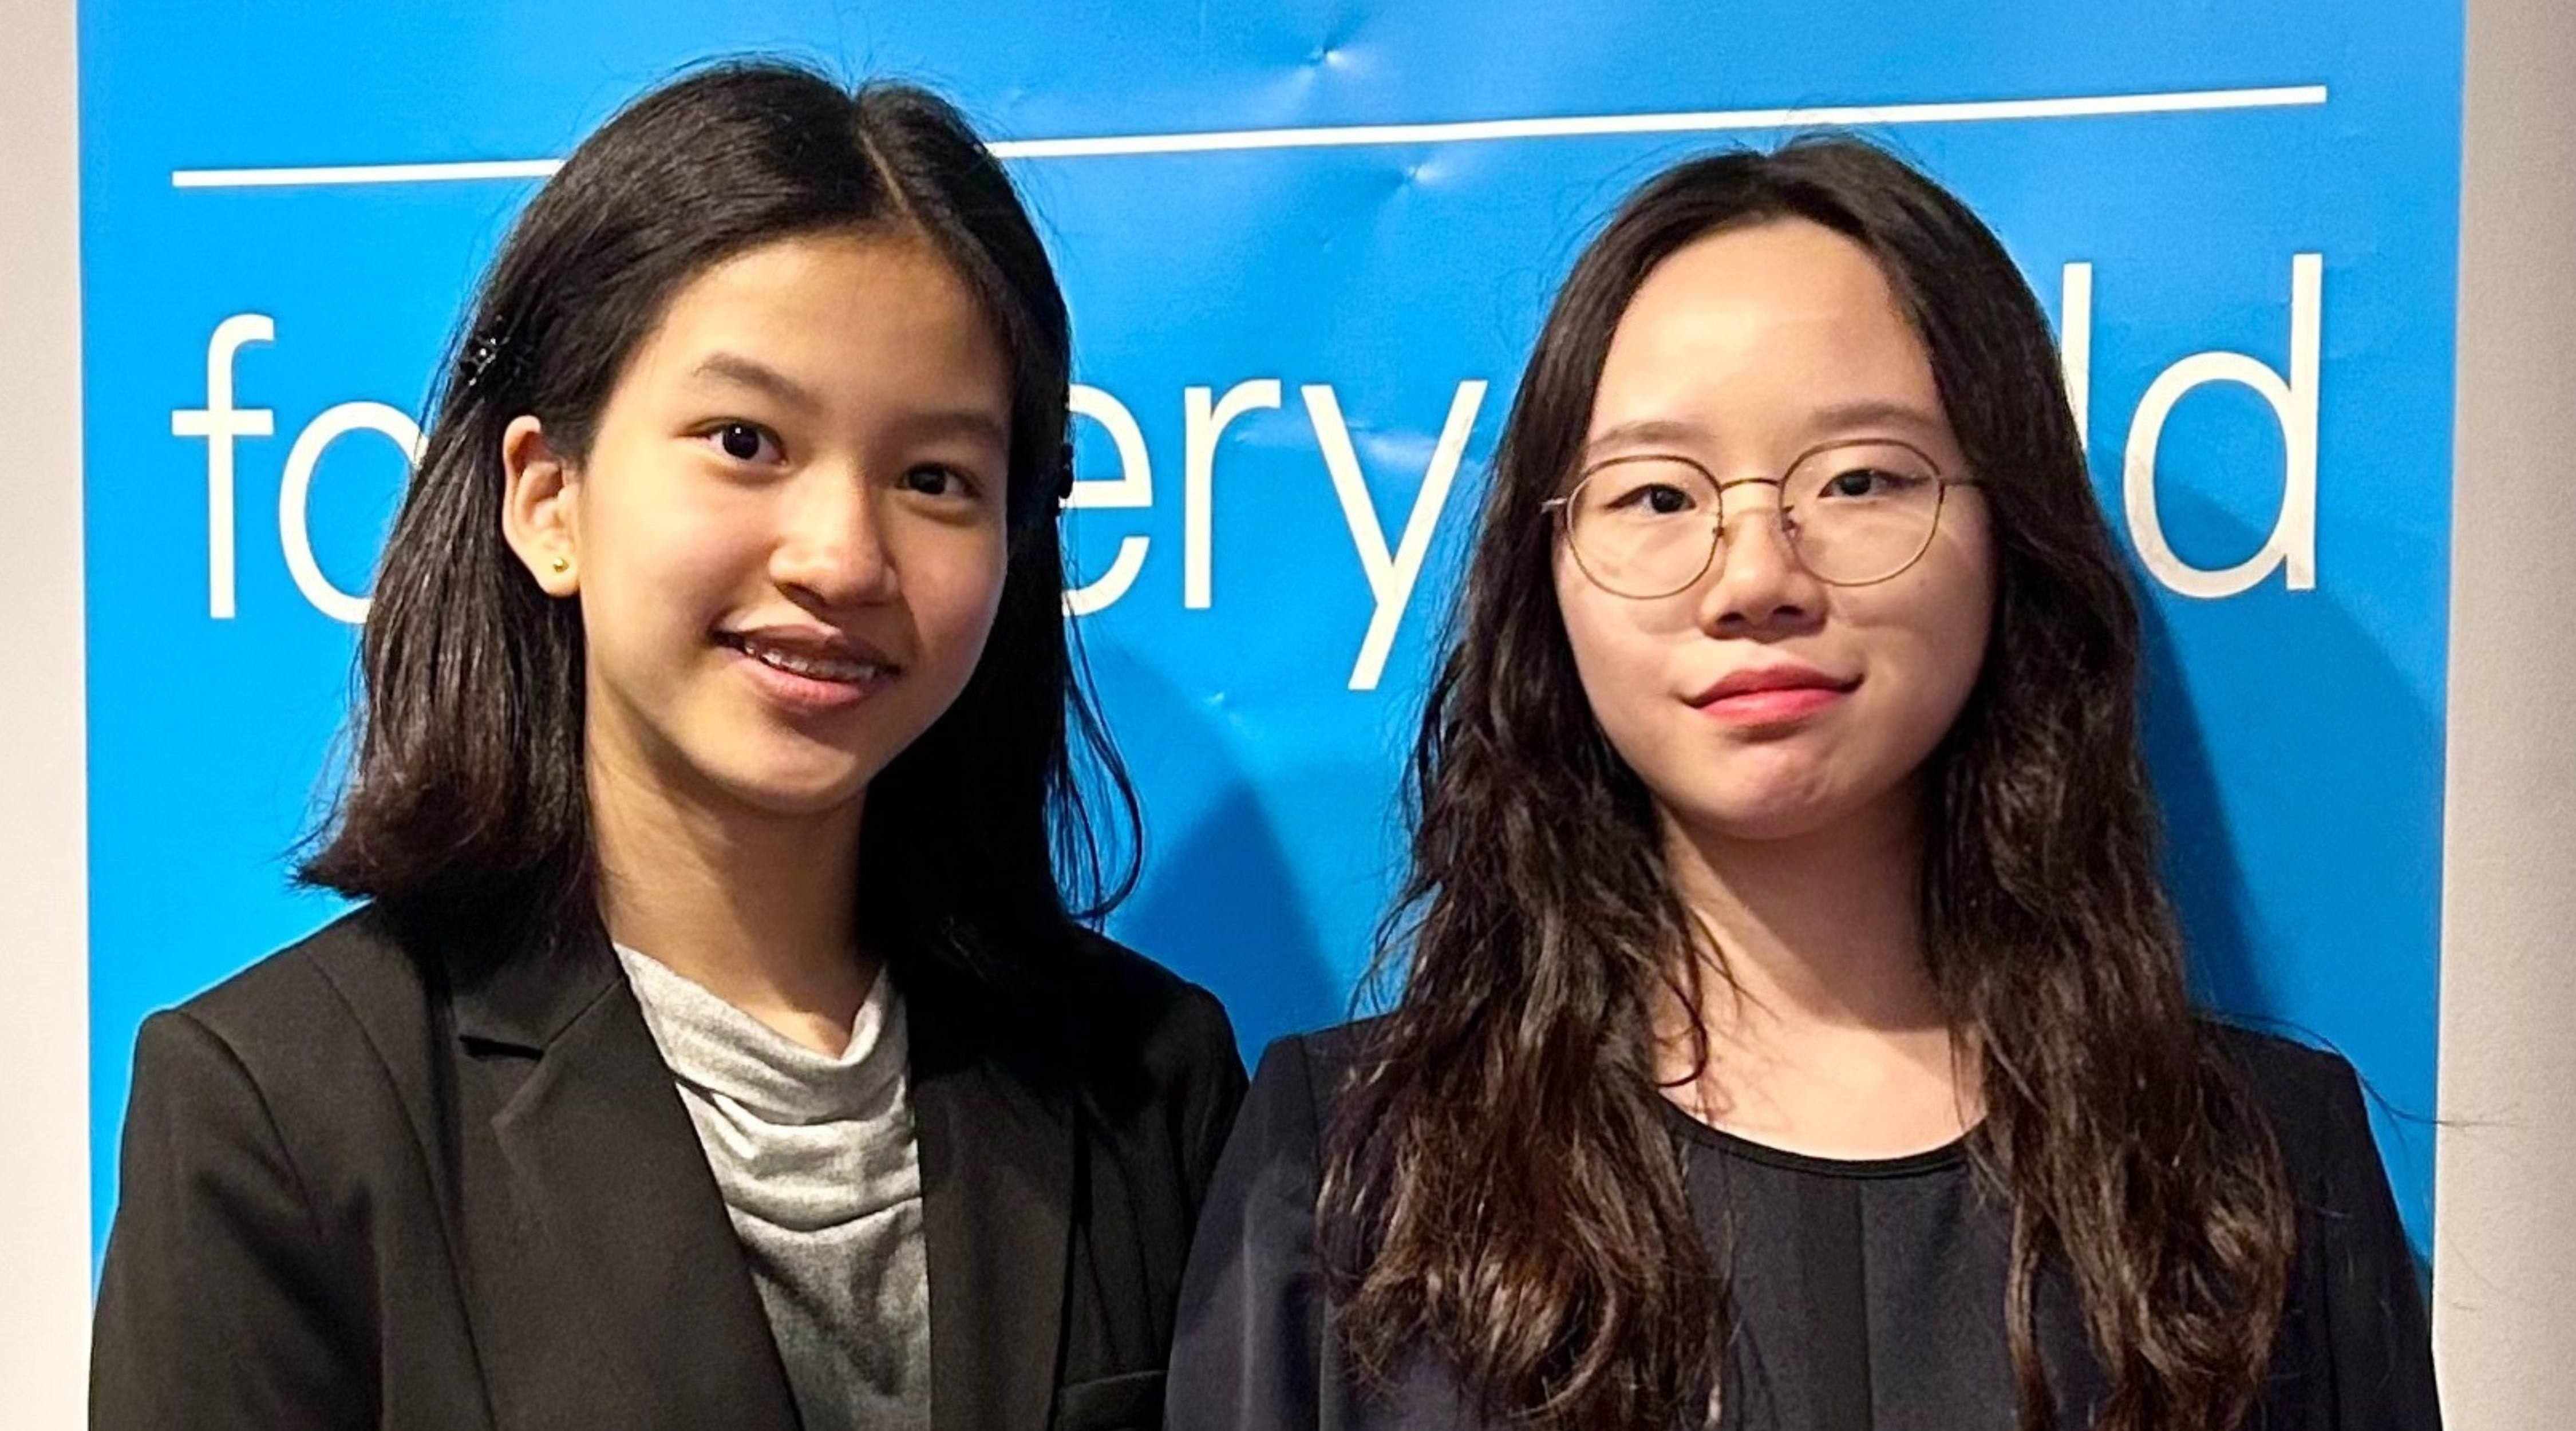 Our BIS HCMC NAE student ambassadors collaborate and develop innovative solutions at the NAE-UNICEF Summit in New York City-Our NAE student ambassadors collaborate and develop innovative solutions-News header  111zon